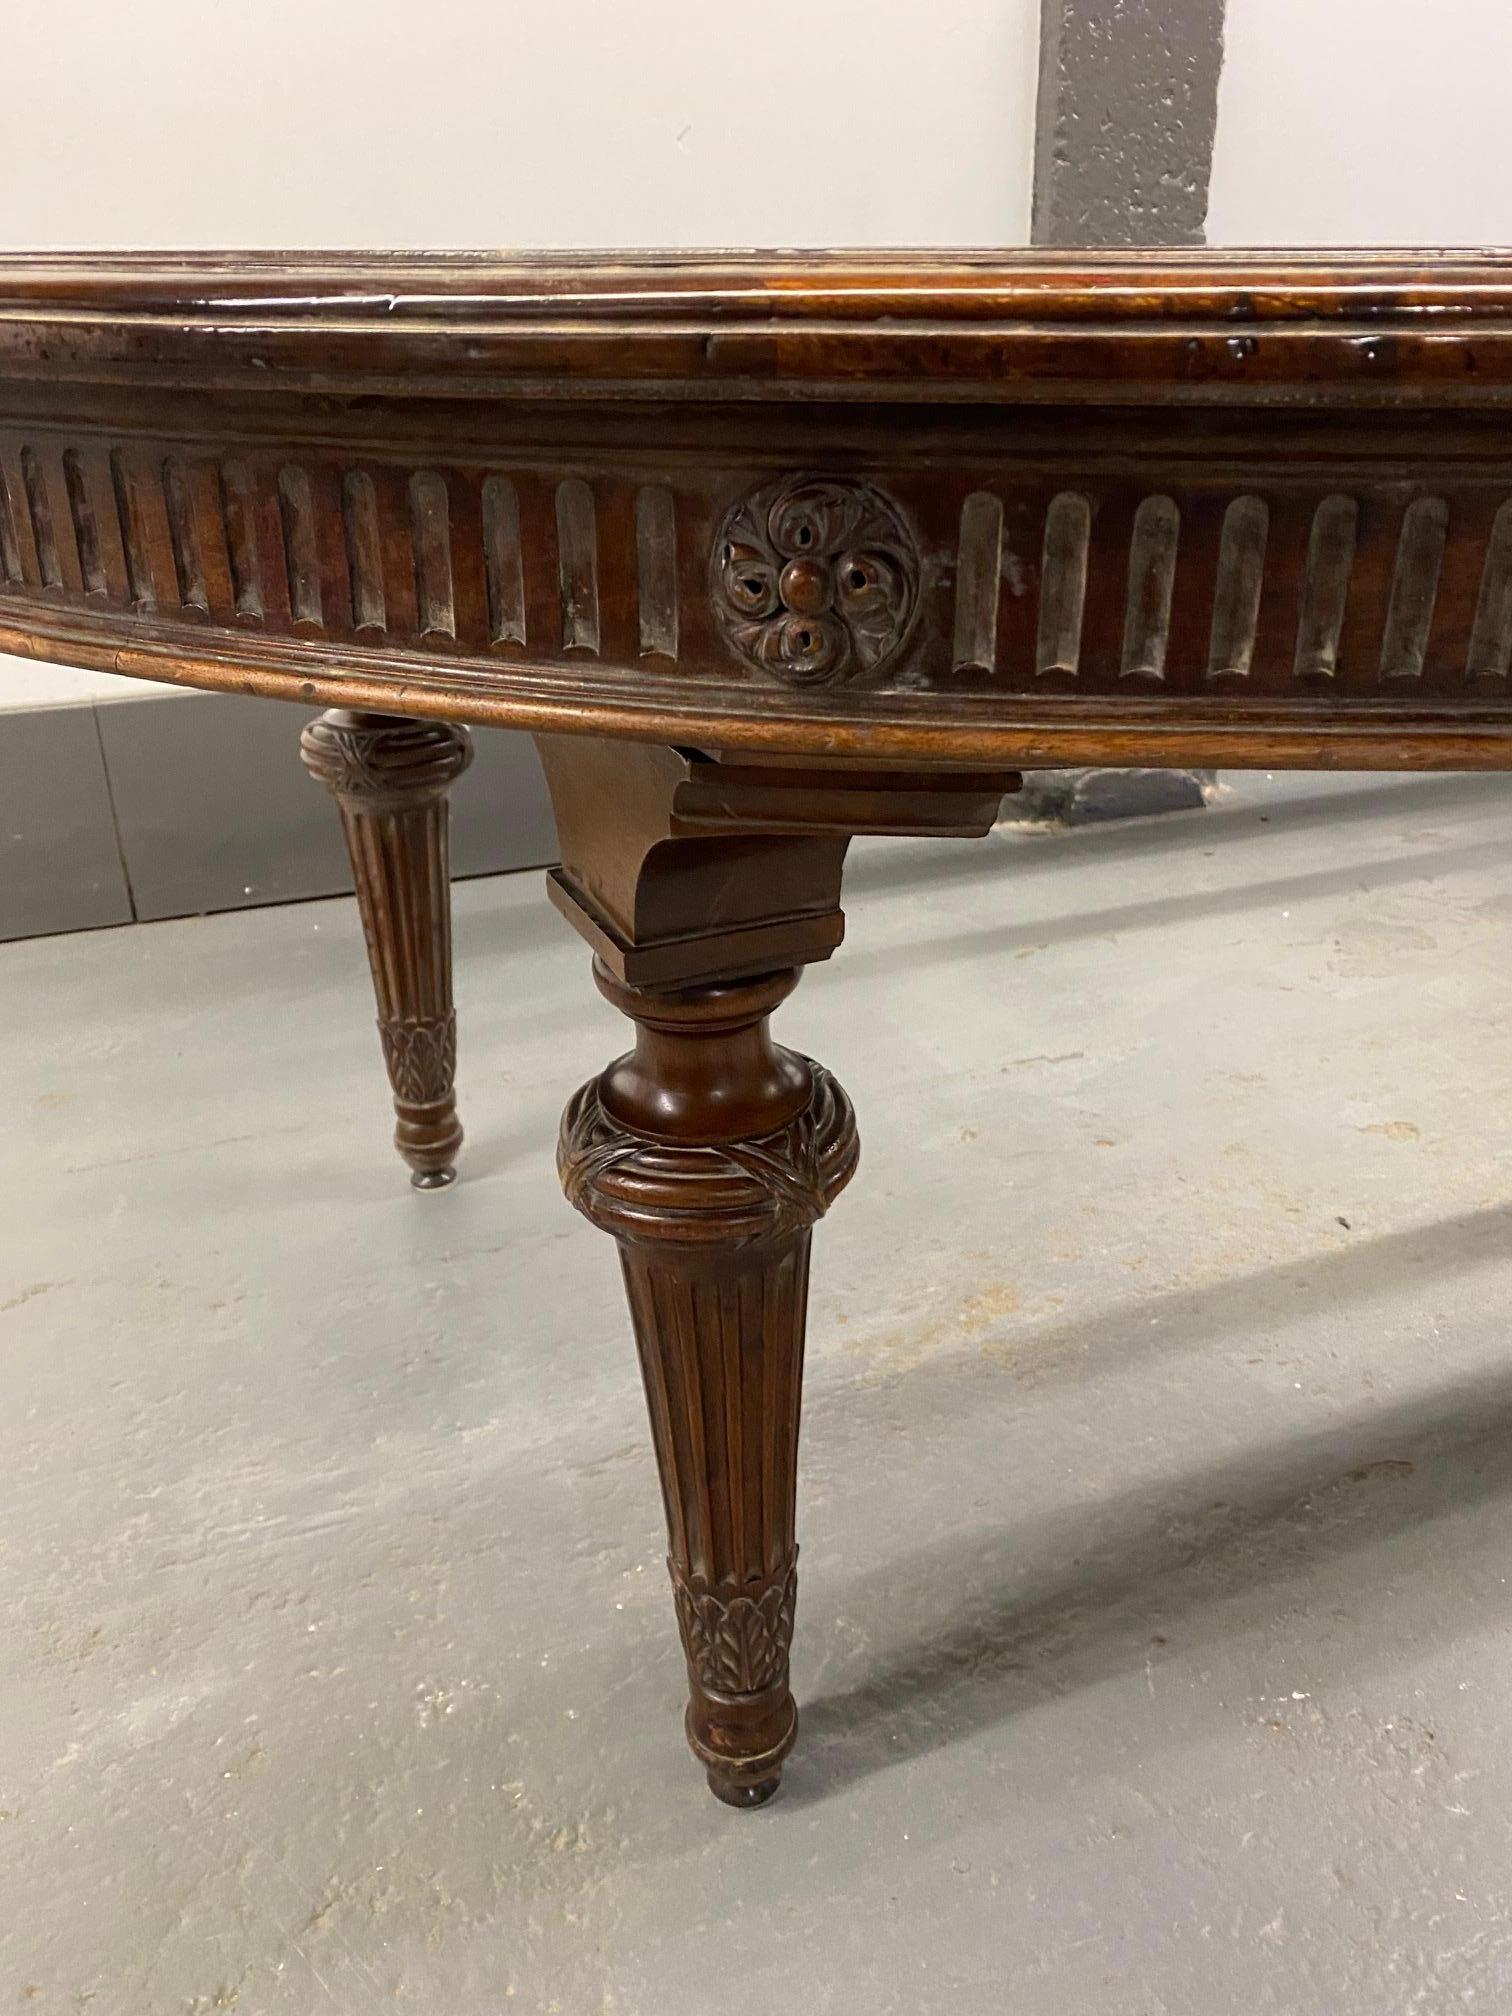 Louis XVI style mahogany dining table including 3 extensions which needs to be refinish. Length when fully extended 178.5 inches.